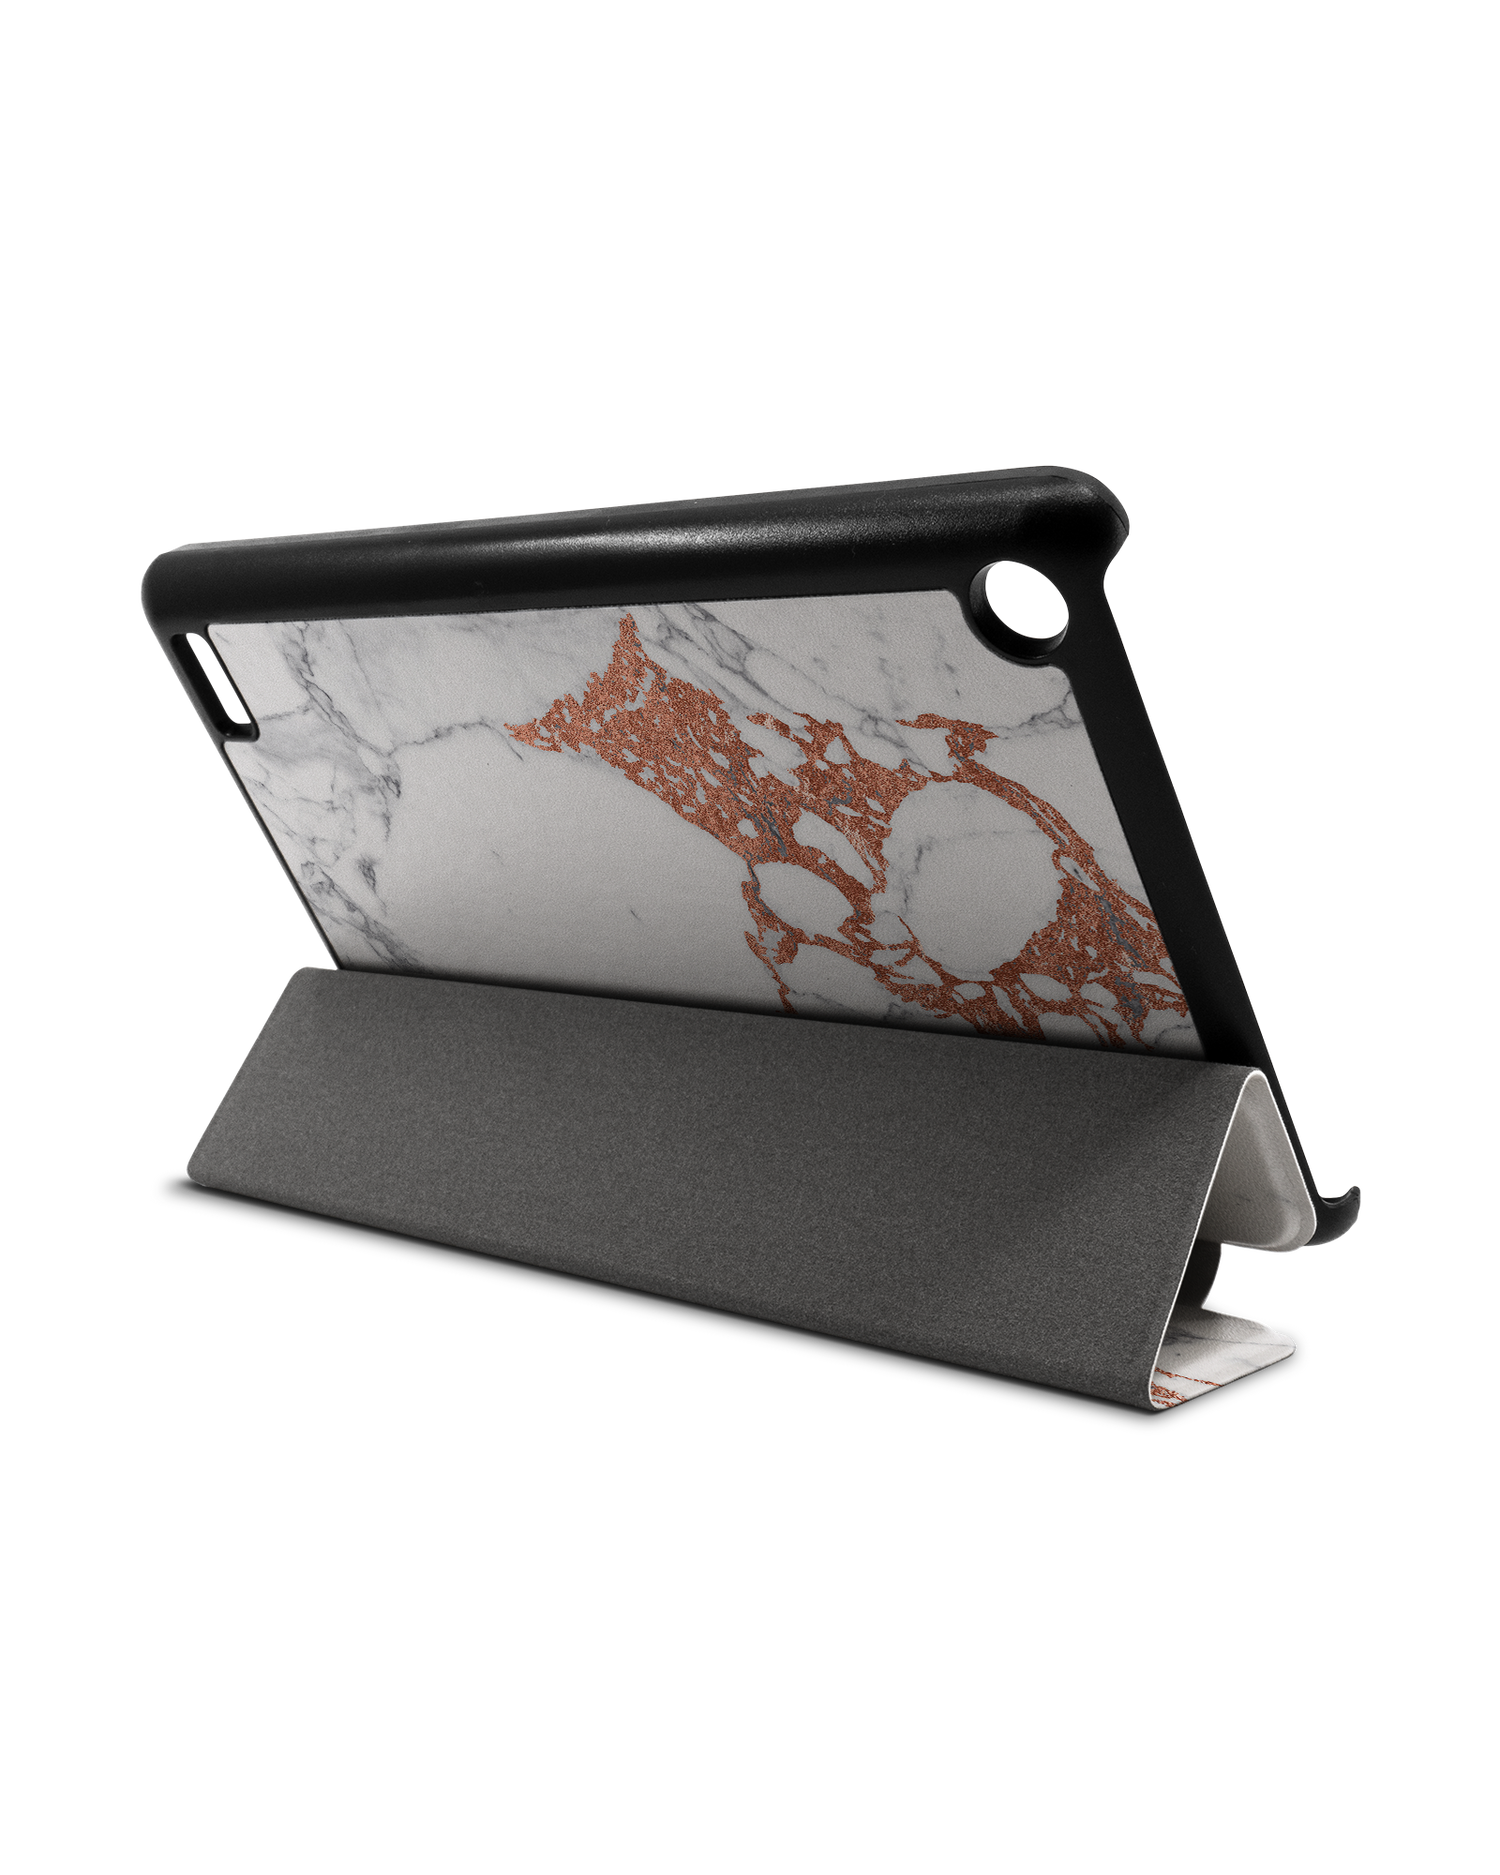 Marble Mix Tablet Smart Case for Amazon Fire 7: Used as Stand